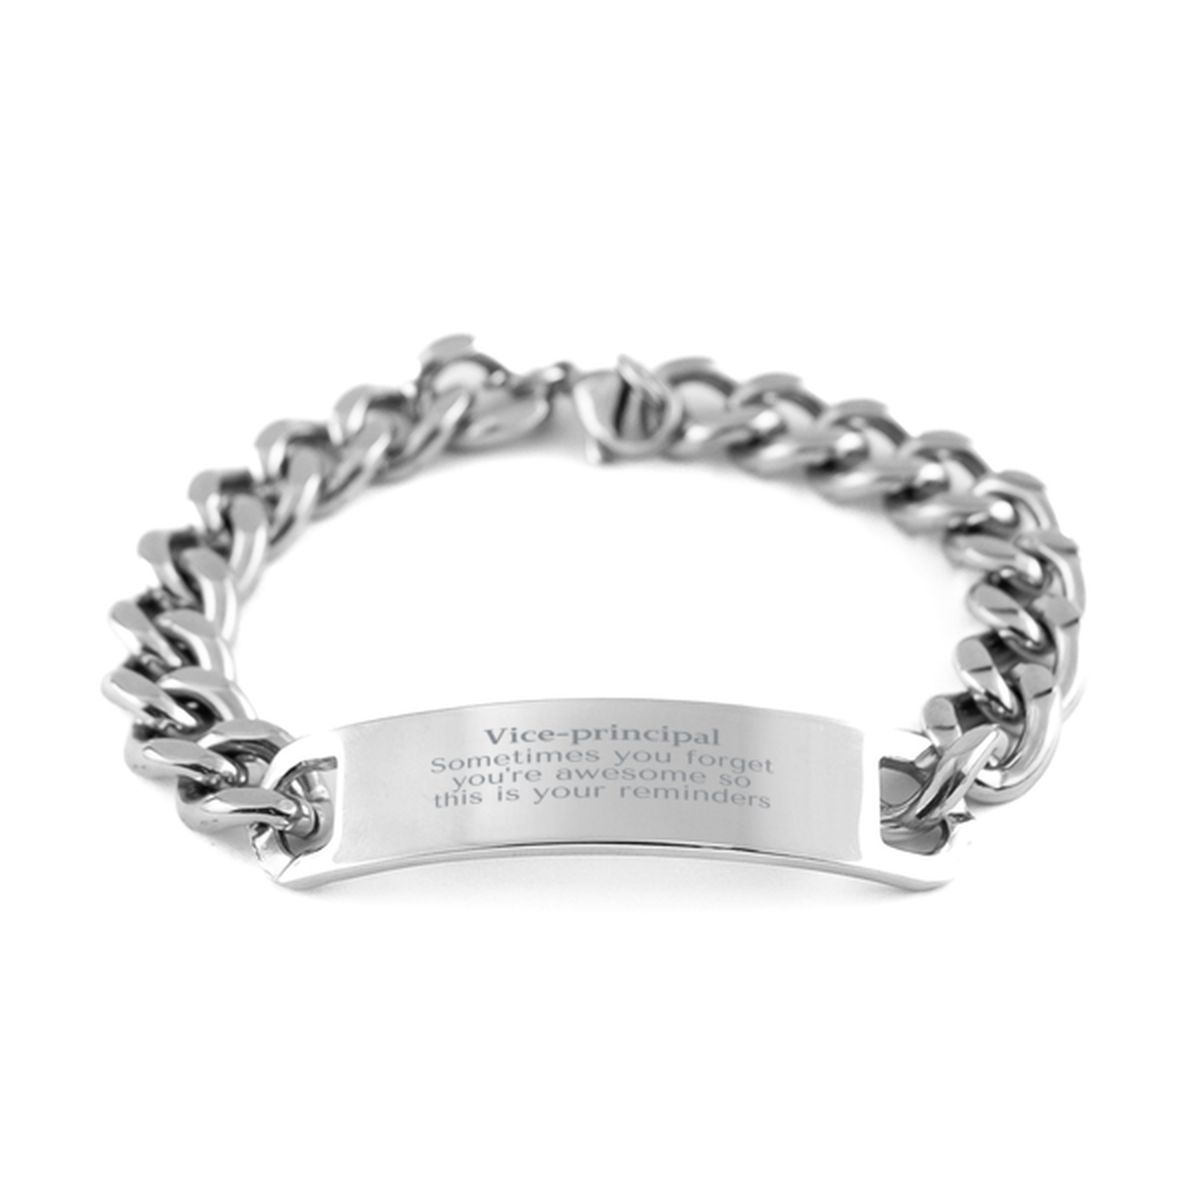 Sentimental Vice-principal Cuban Chain Stainless Steel Bracelet, Vice-principal Sometimes you forget you're awesome so this is your reminders, Graduation Christmas Birthday Gifts for Vice-principal, Men, Women, Coworkers